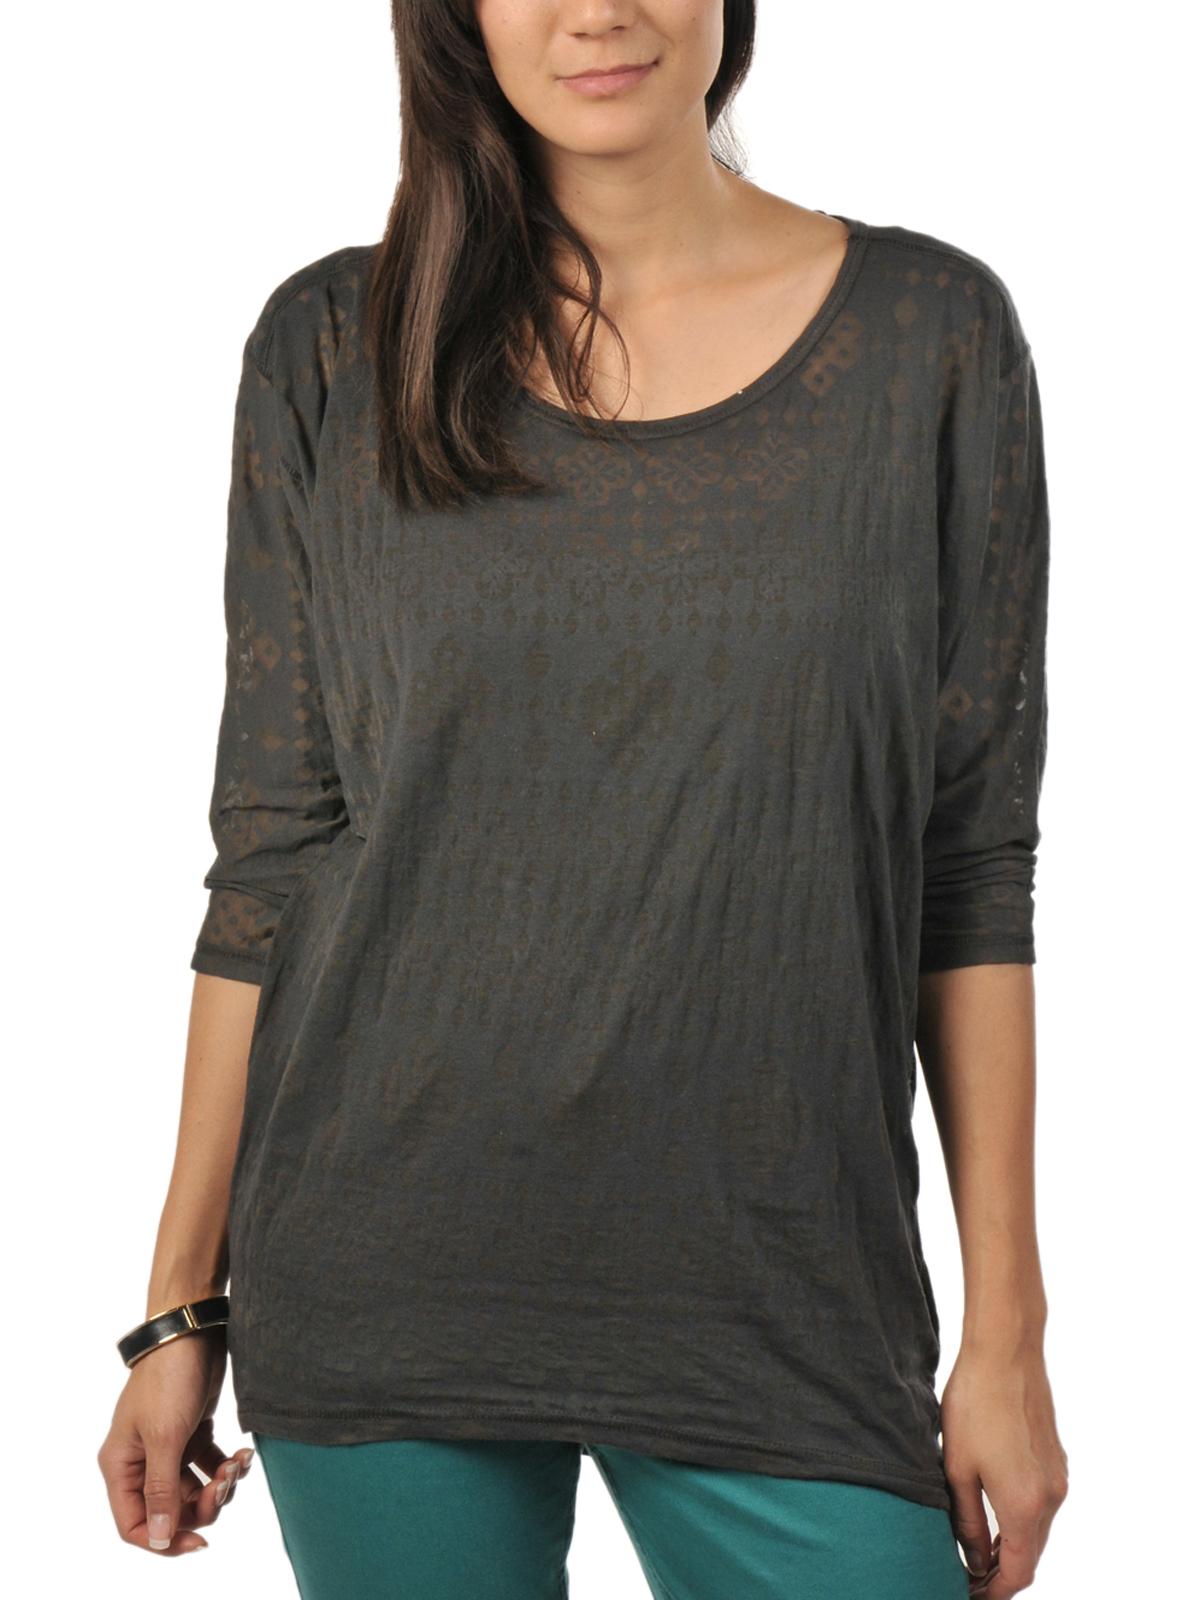 Foto Only Hippy Burn Out Long Boxy Camiseta 3/4 gris oscuro S